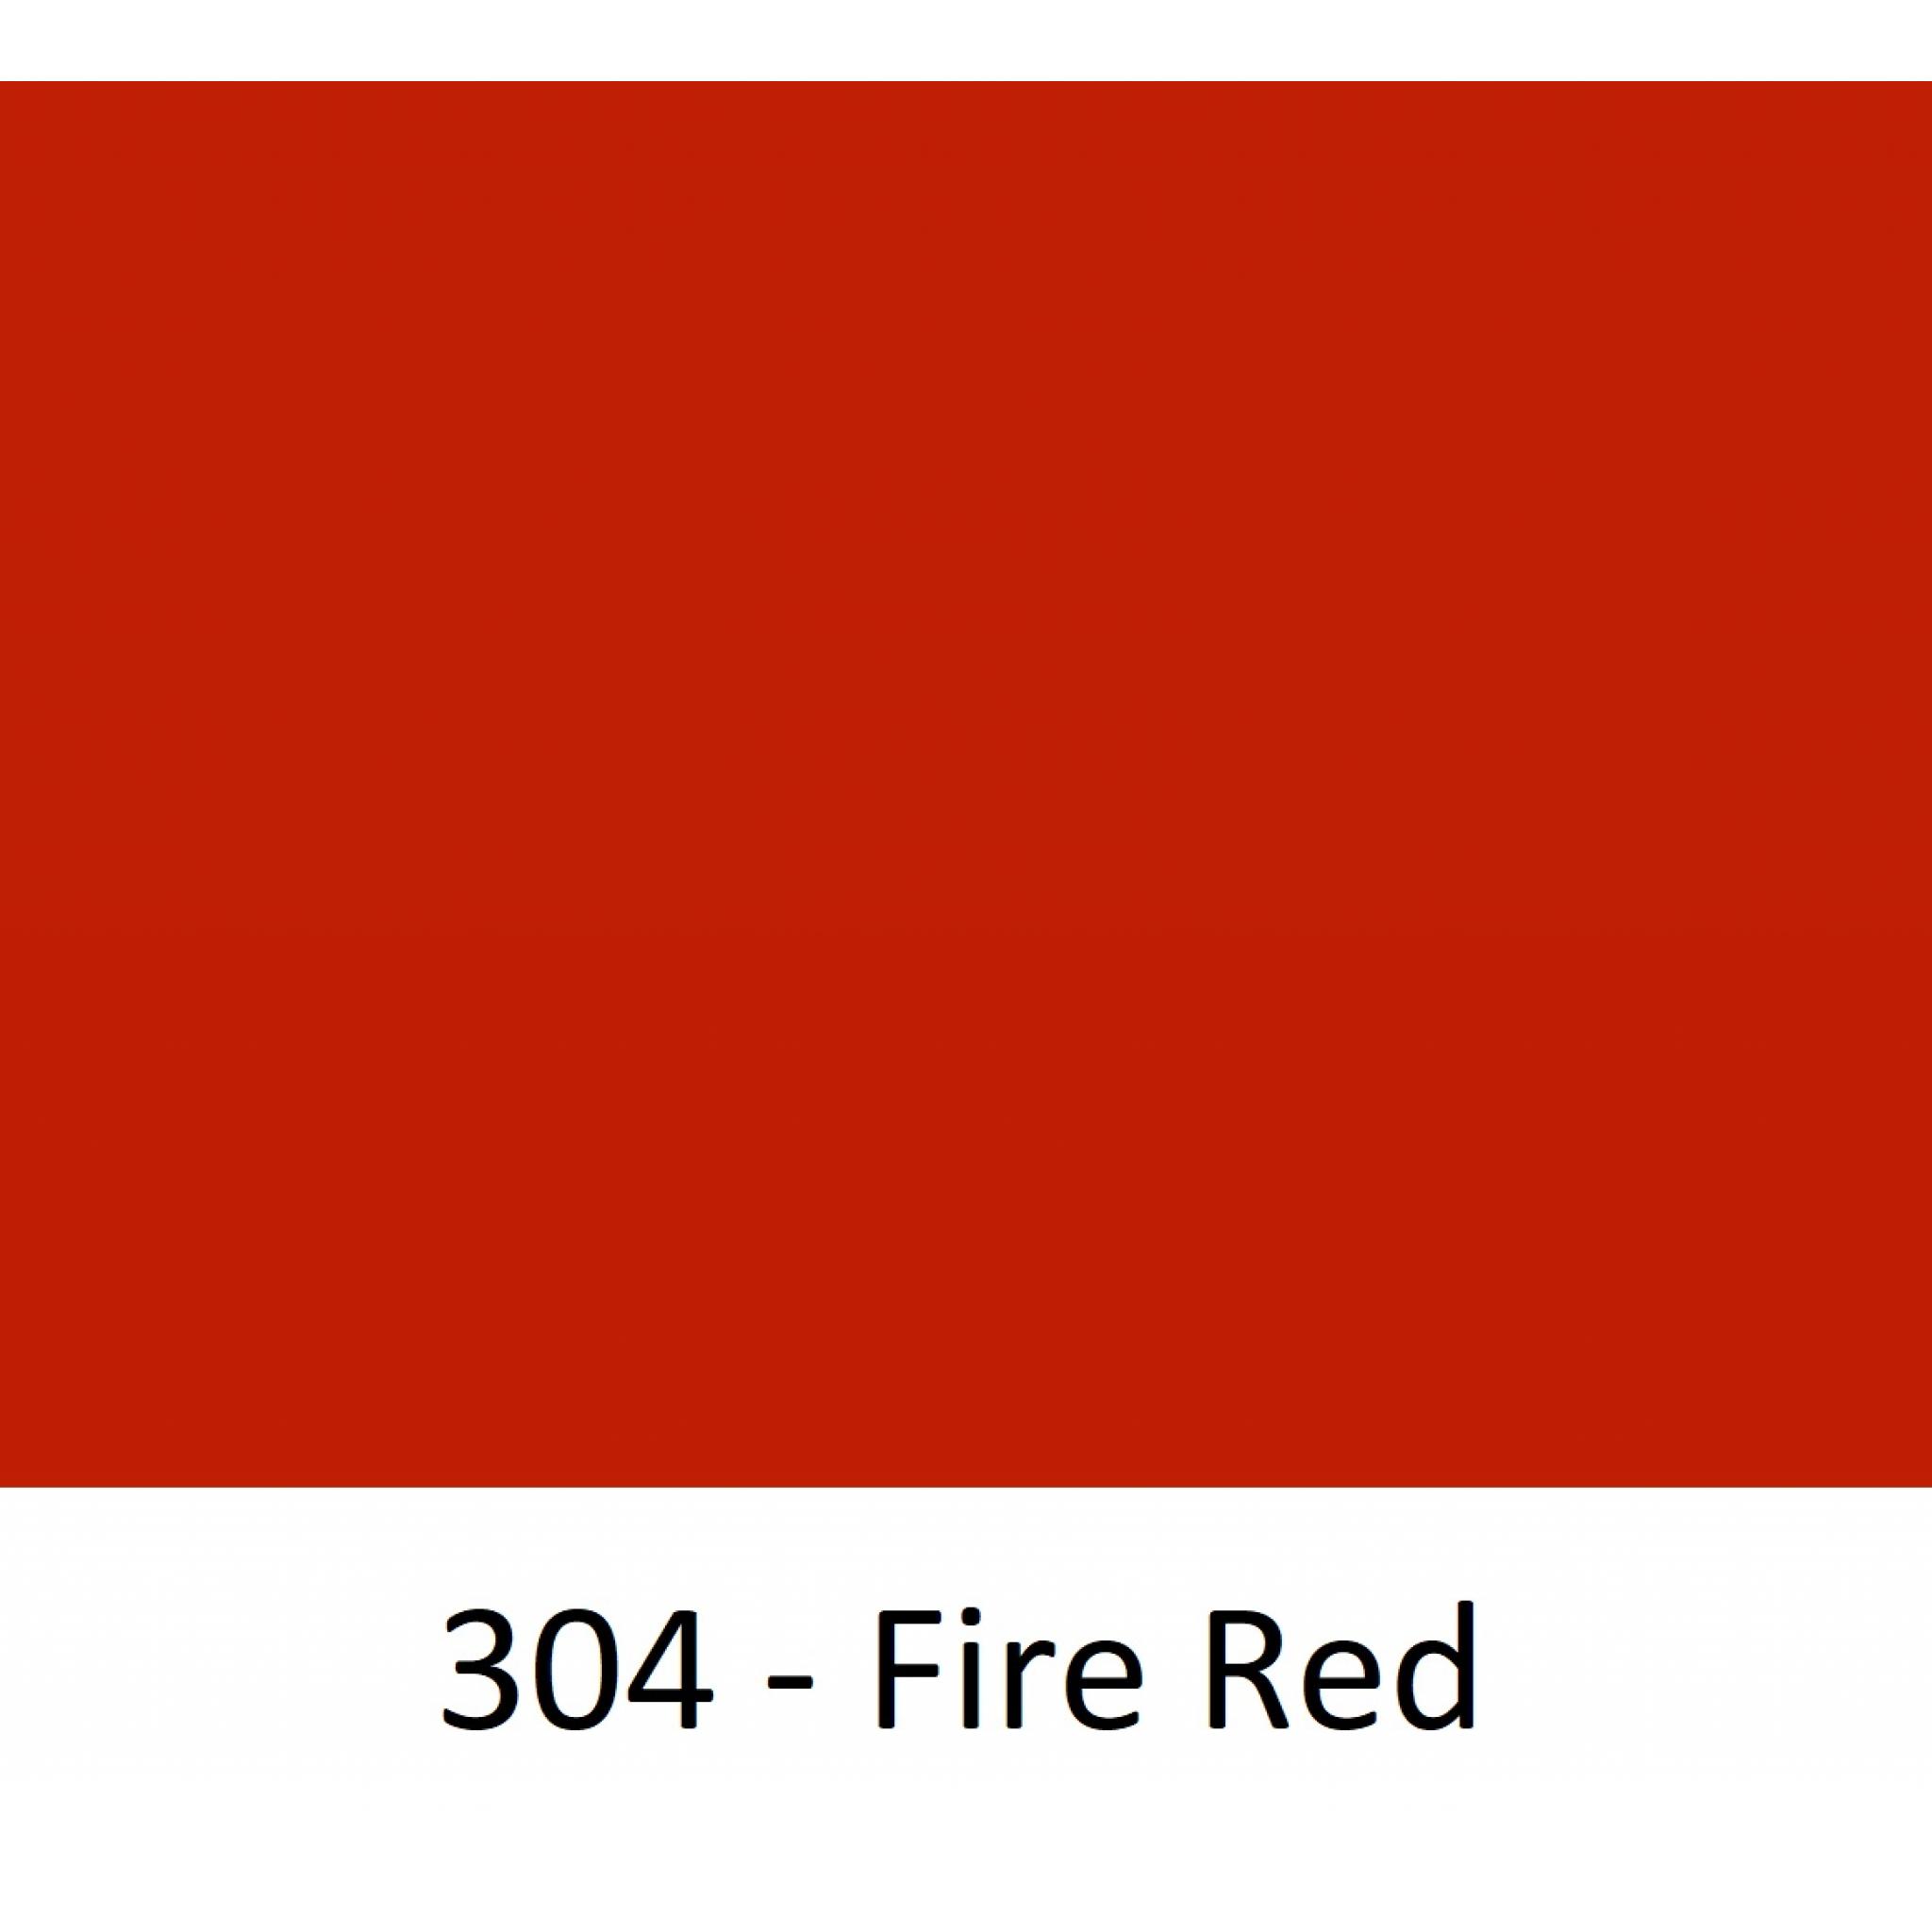 1260mm Wide Oracal 551 Series High Performance Cal Vinyl - Fire Red 304